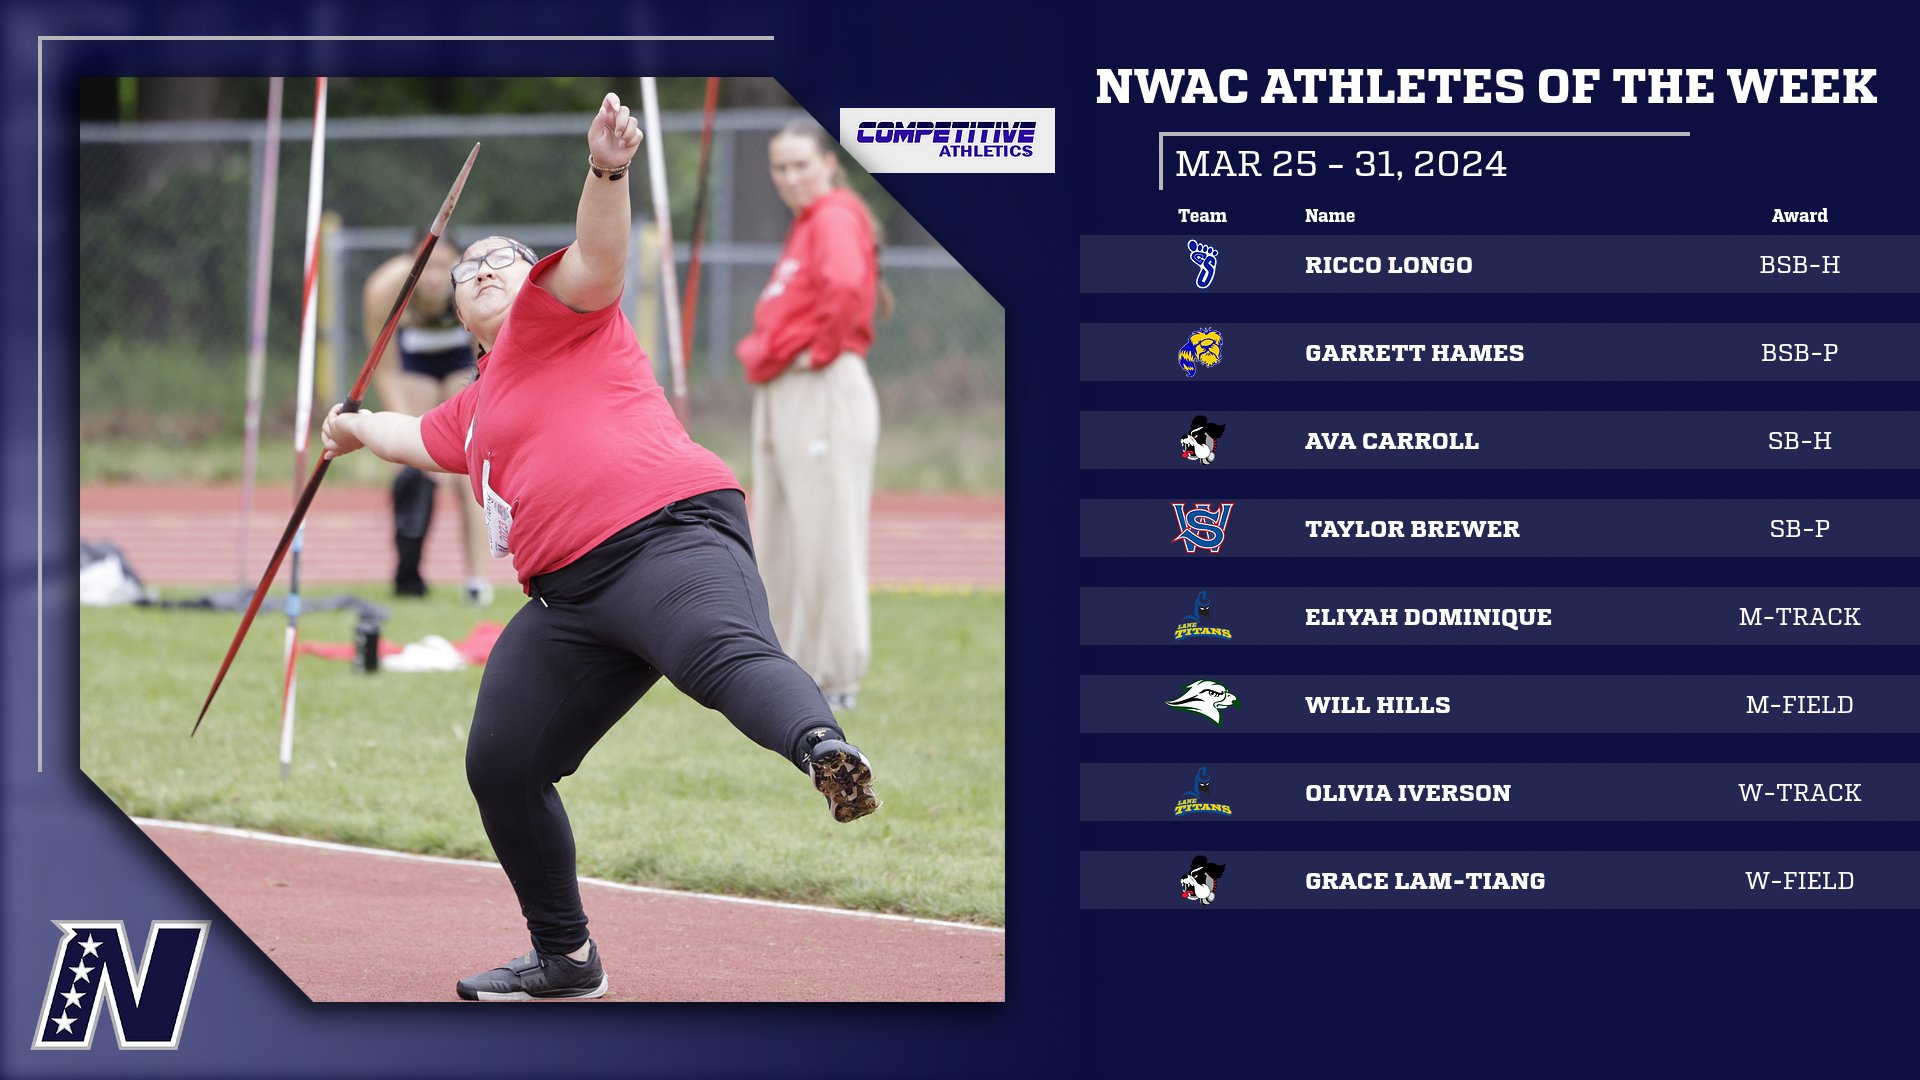 Competitive Athletics NWAC Athletes of the Week: March 25-31